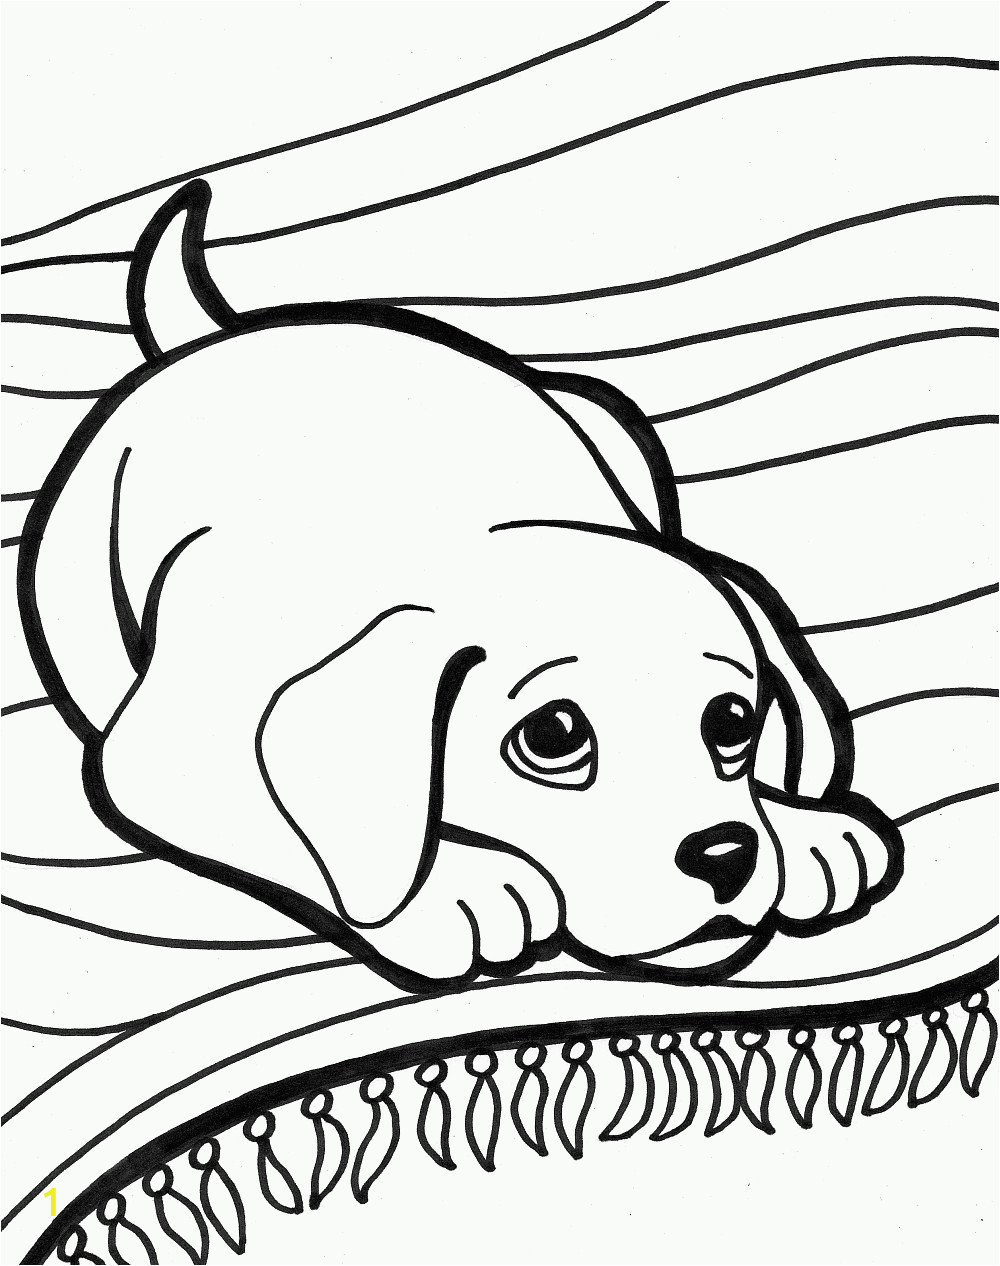 Cute Dogs Coloring Pages to Print Unique Cute Dog Coloring Pages 67 Coloring Pages for